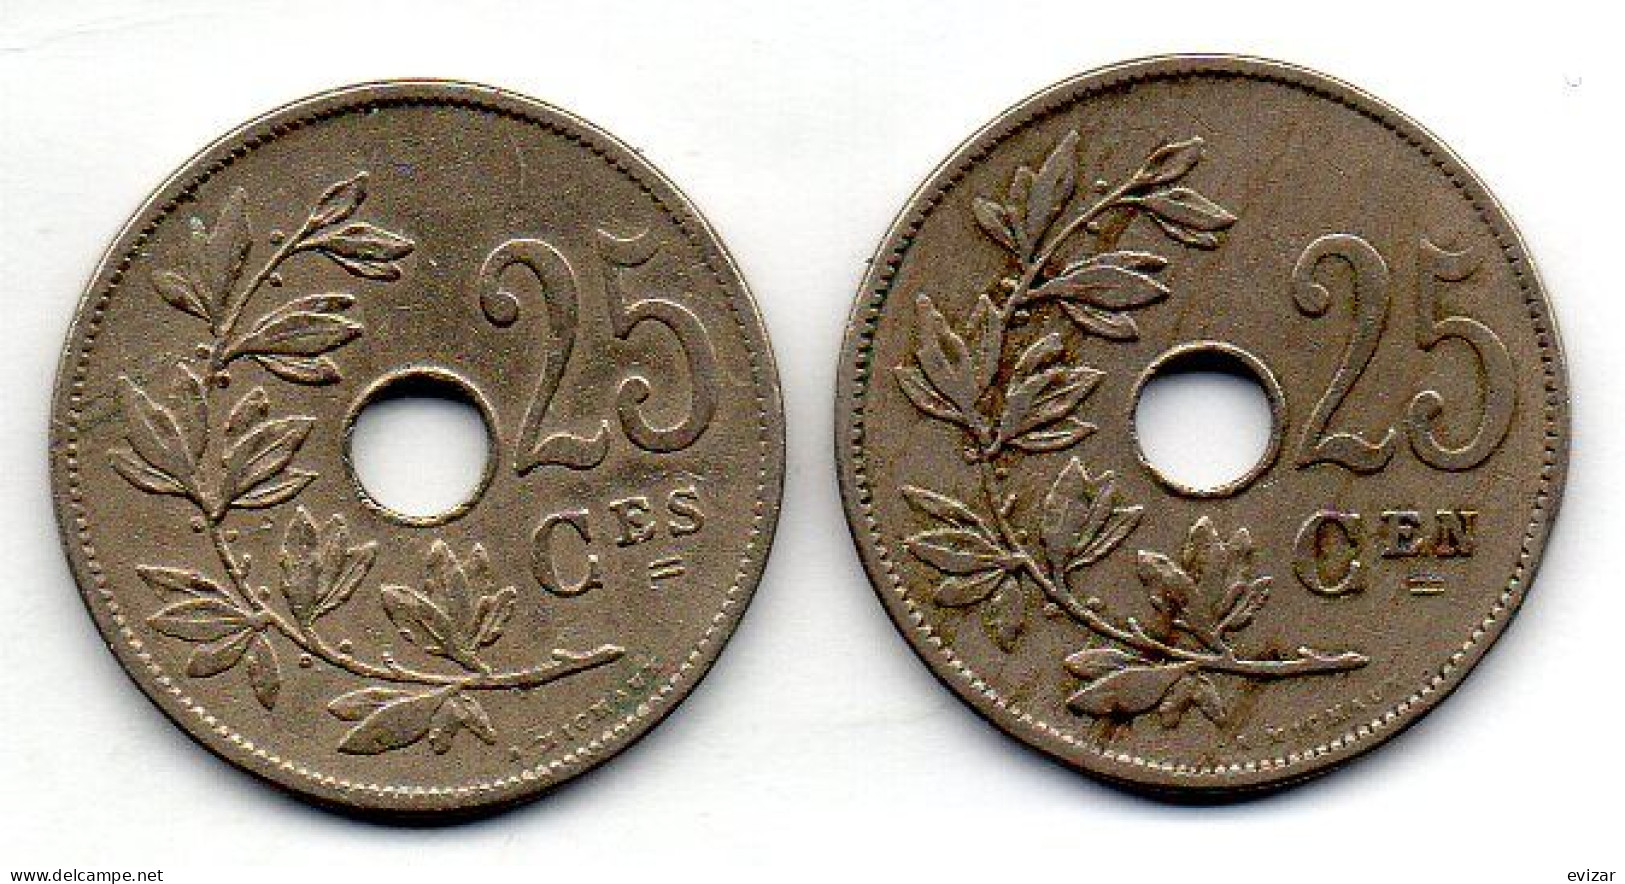 BELGIUM - Set Of Two Coins 25 Centimes, Copper-Nickel, Year 1909, 1908, KM # 62, 63, French & Dutch Legend - 25 Centimes